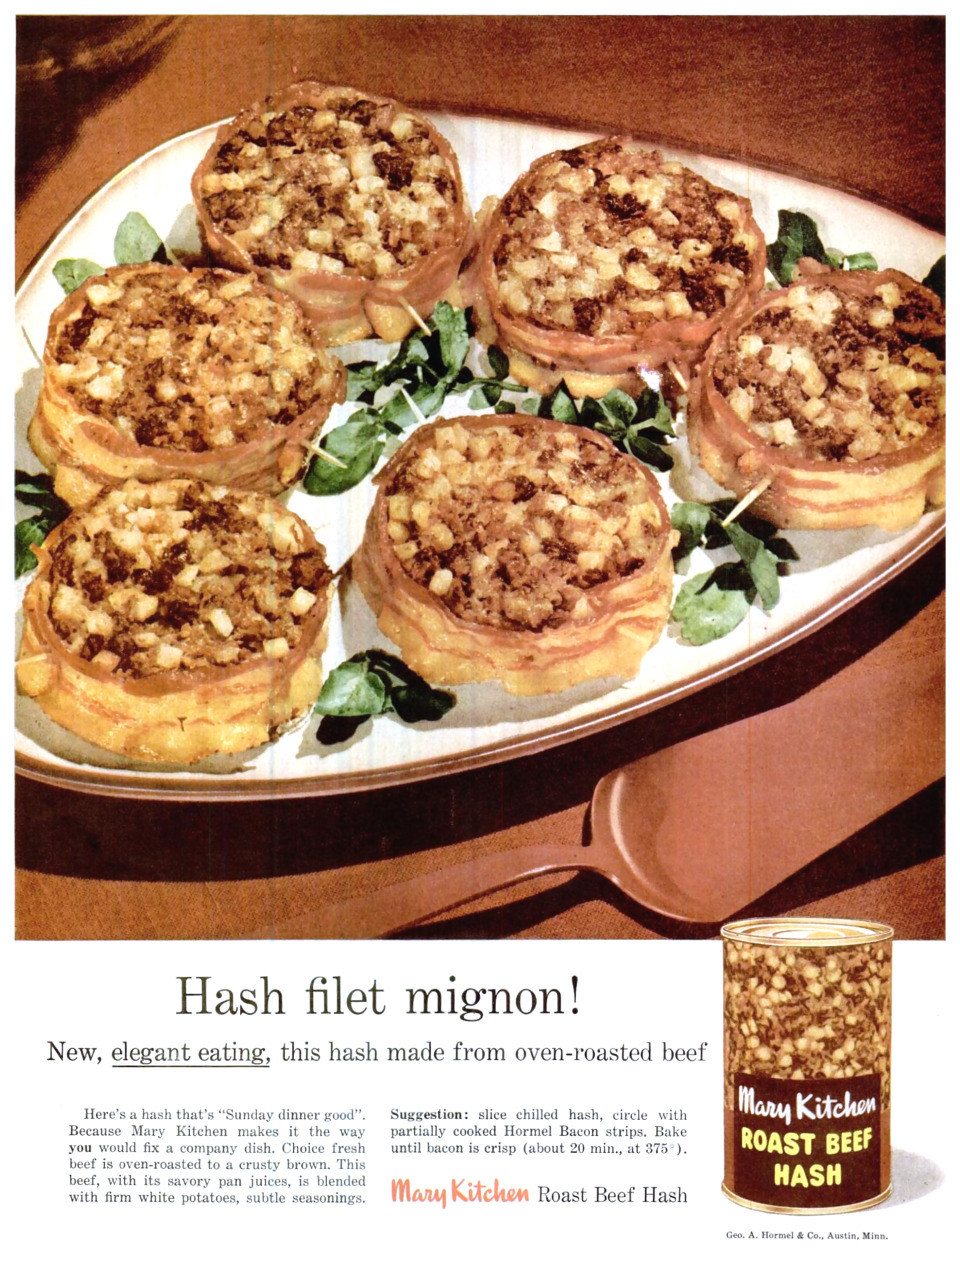 George A. Hormel Company Mary Kitchen Roast Beef Hash - 1956